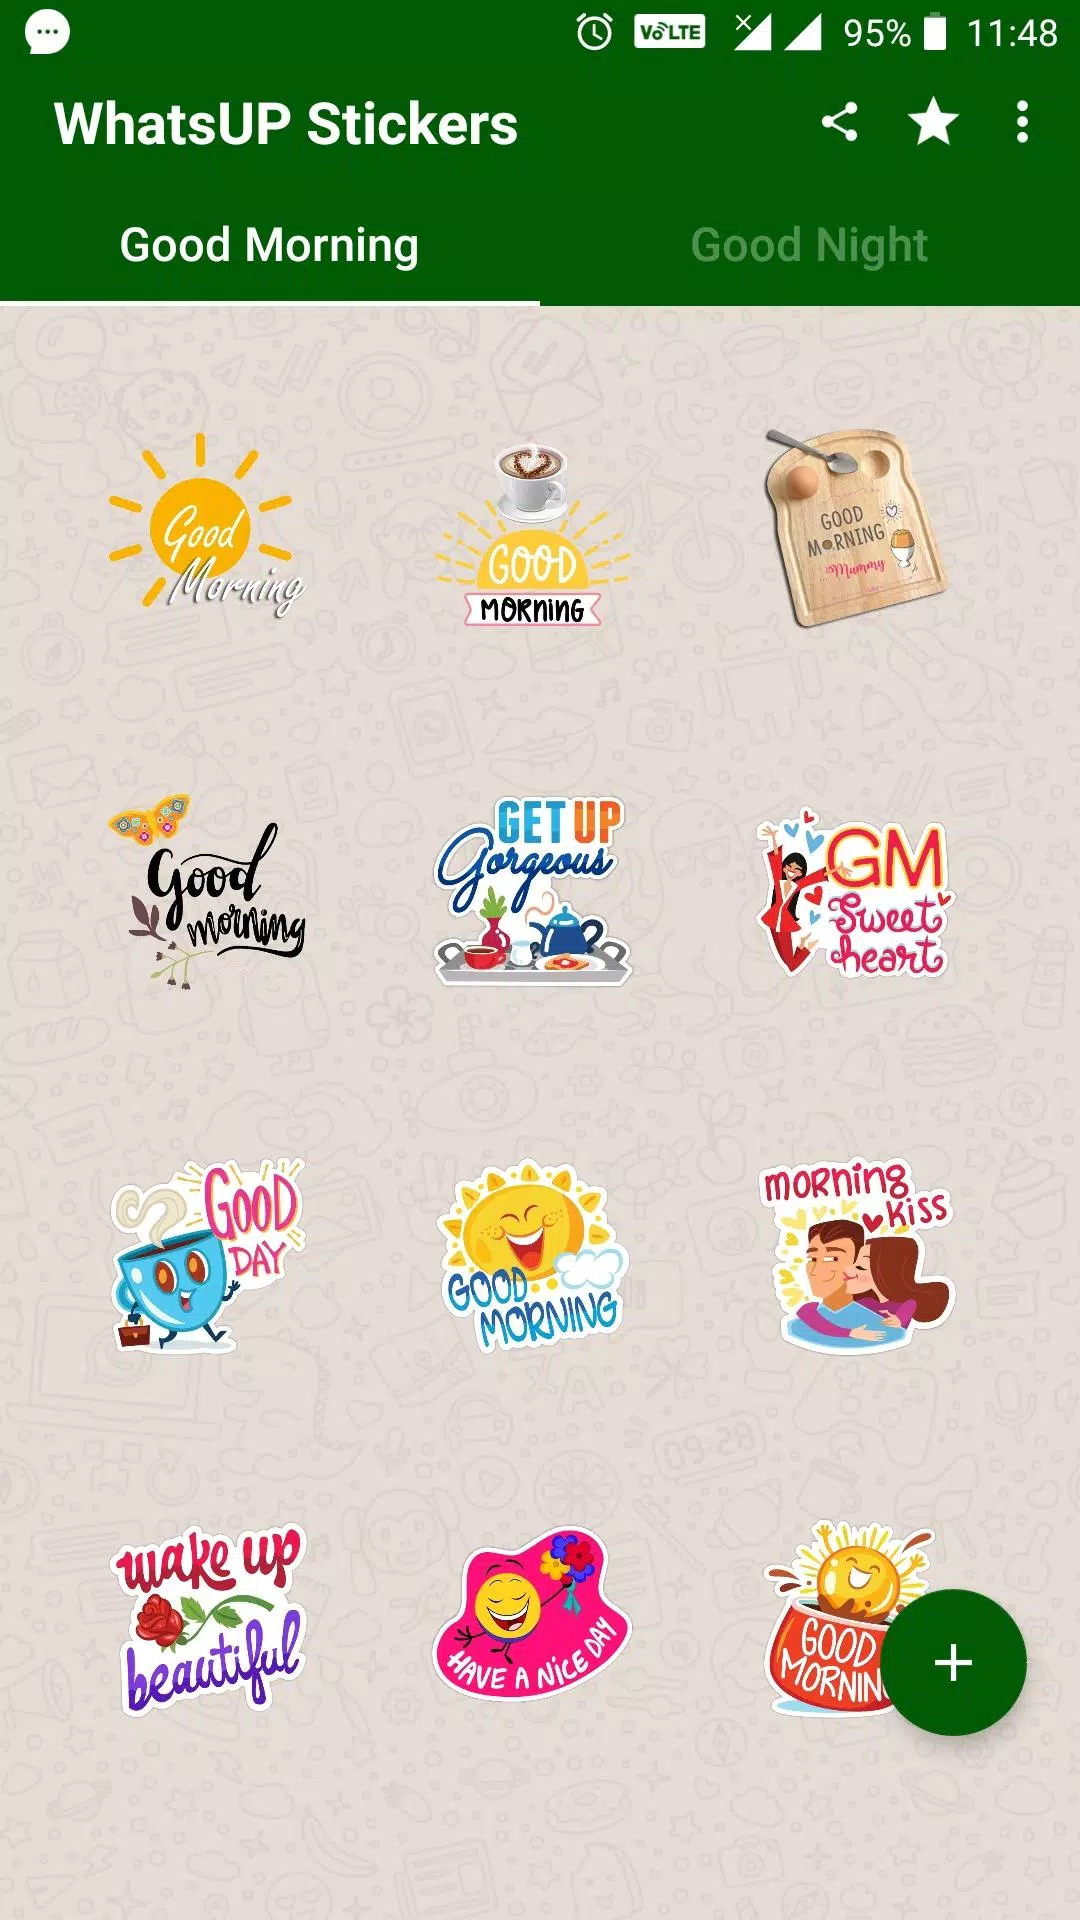 WhatsApp Stickers | Good Morning & Good Night Pack APK for Android ...